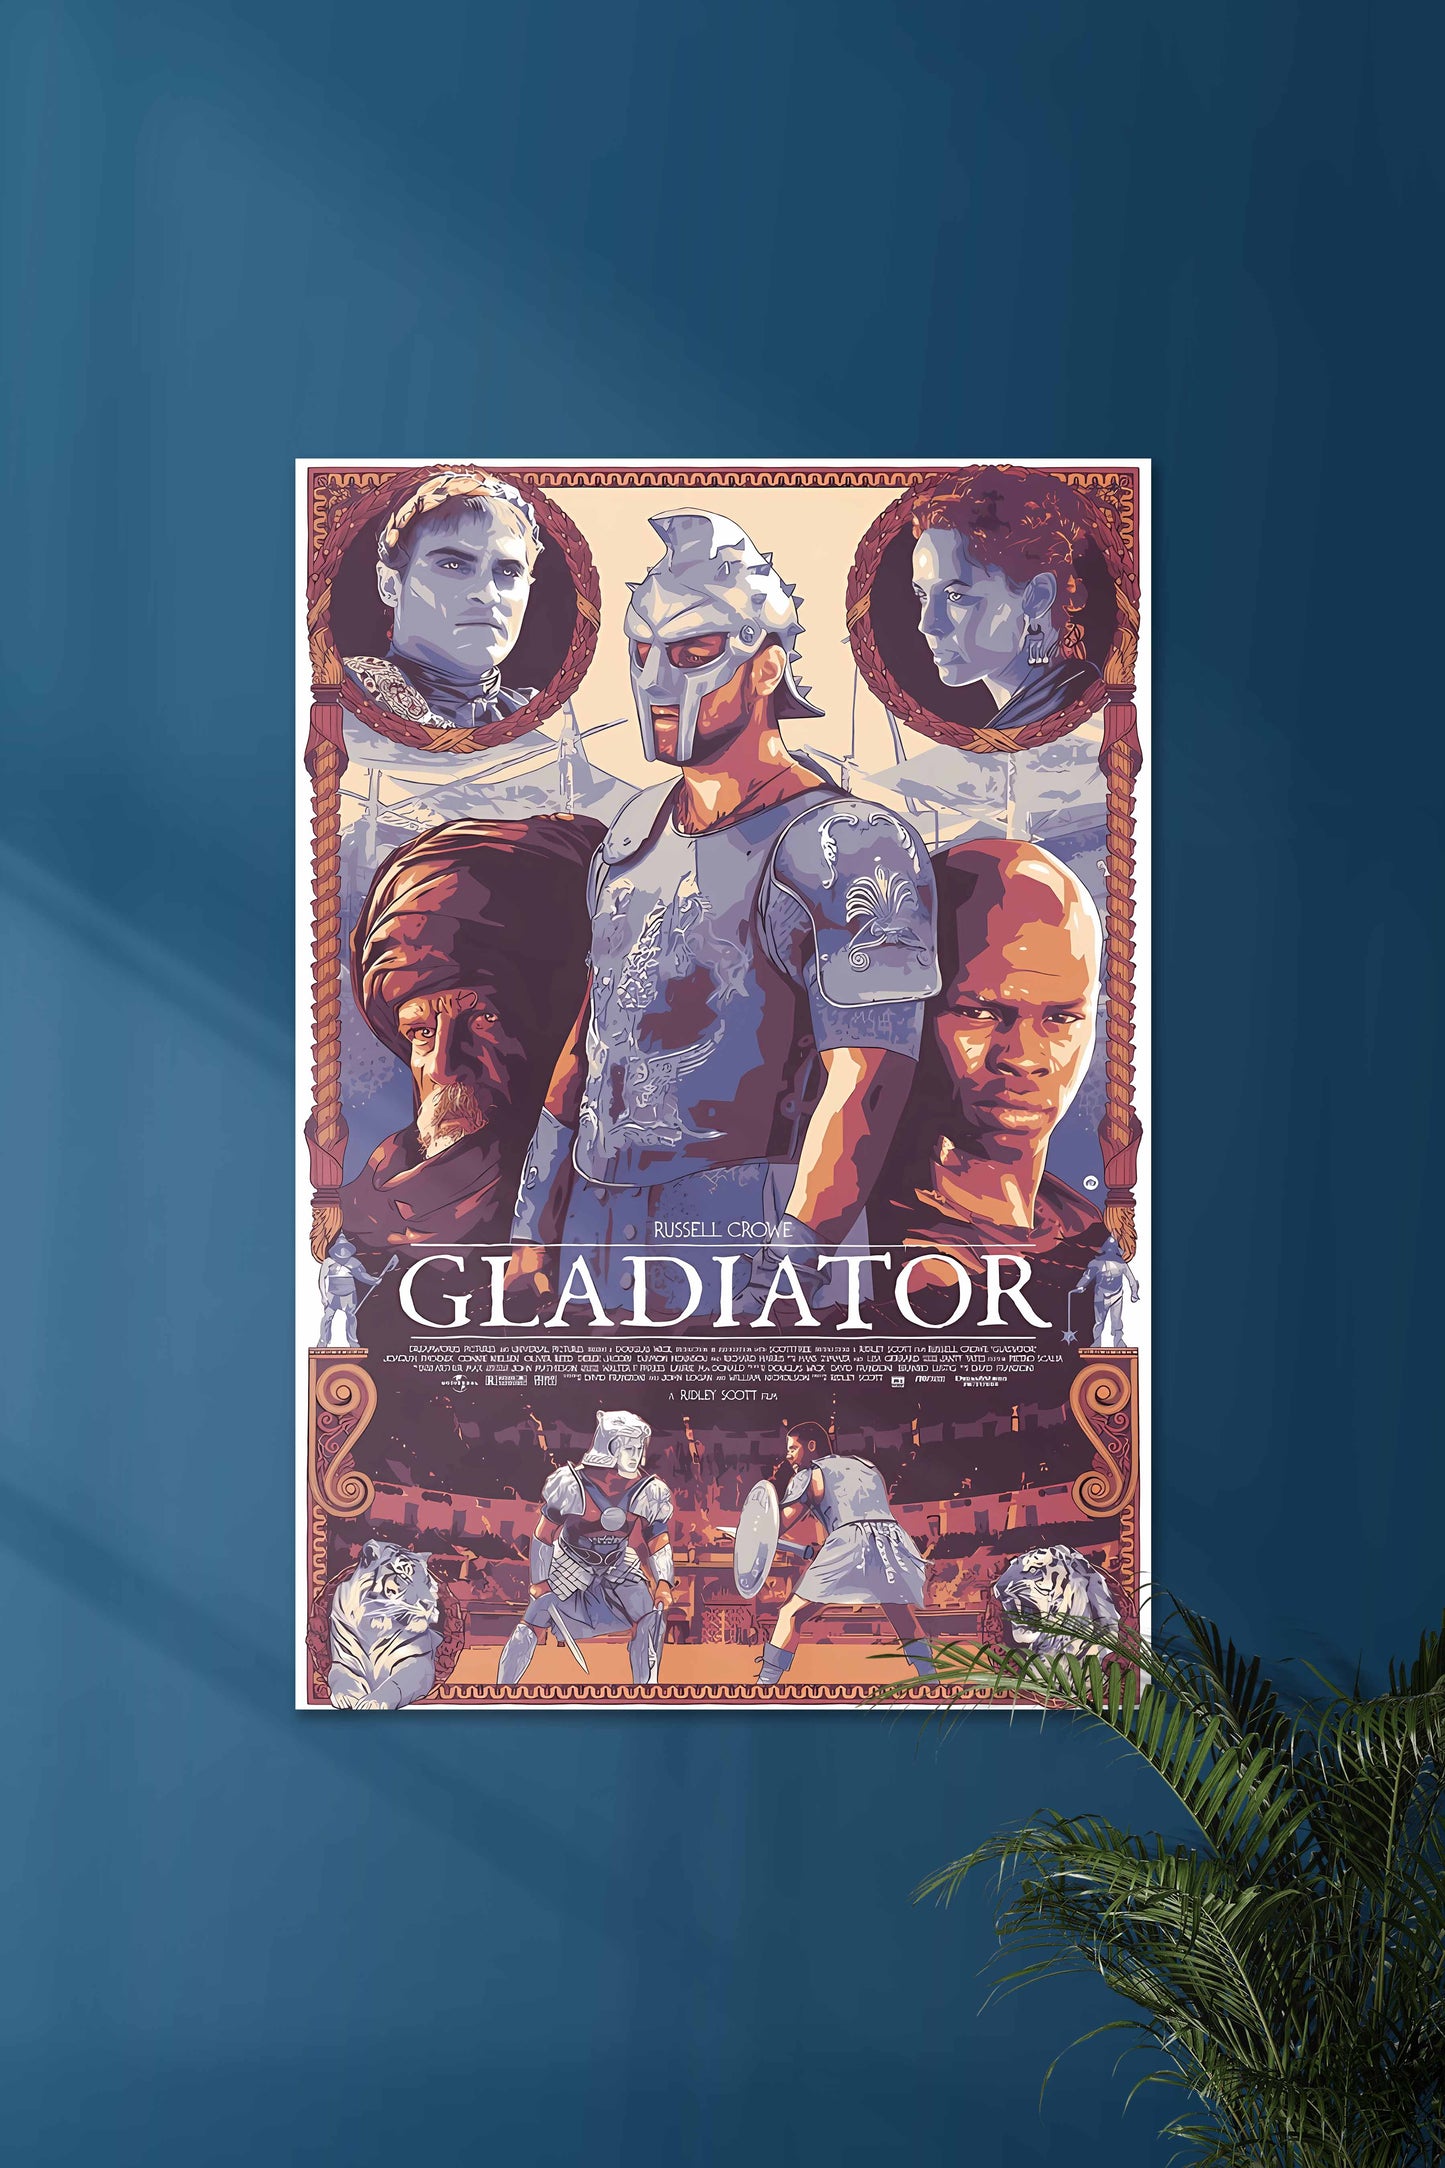 Gladiator #02 | Russell Crowe | MOVIE POSTERS